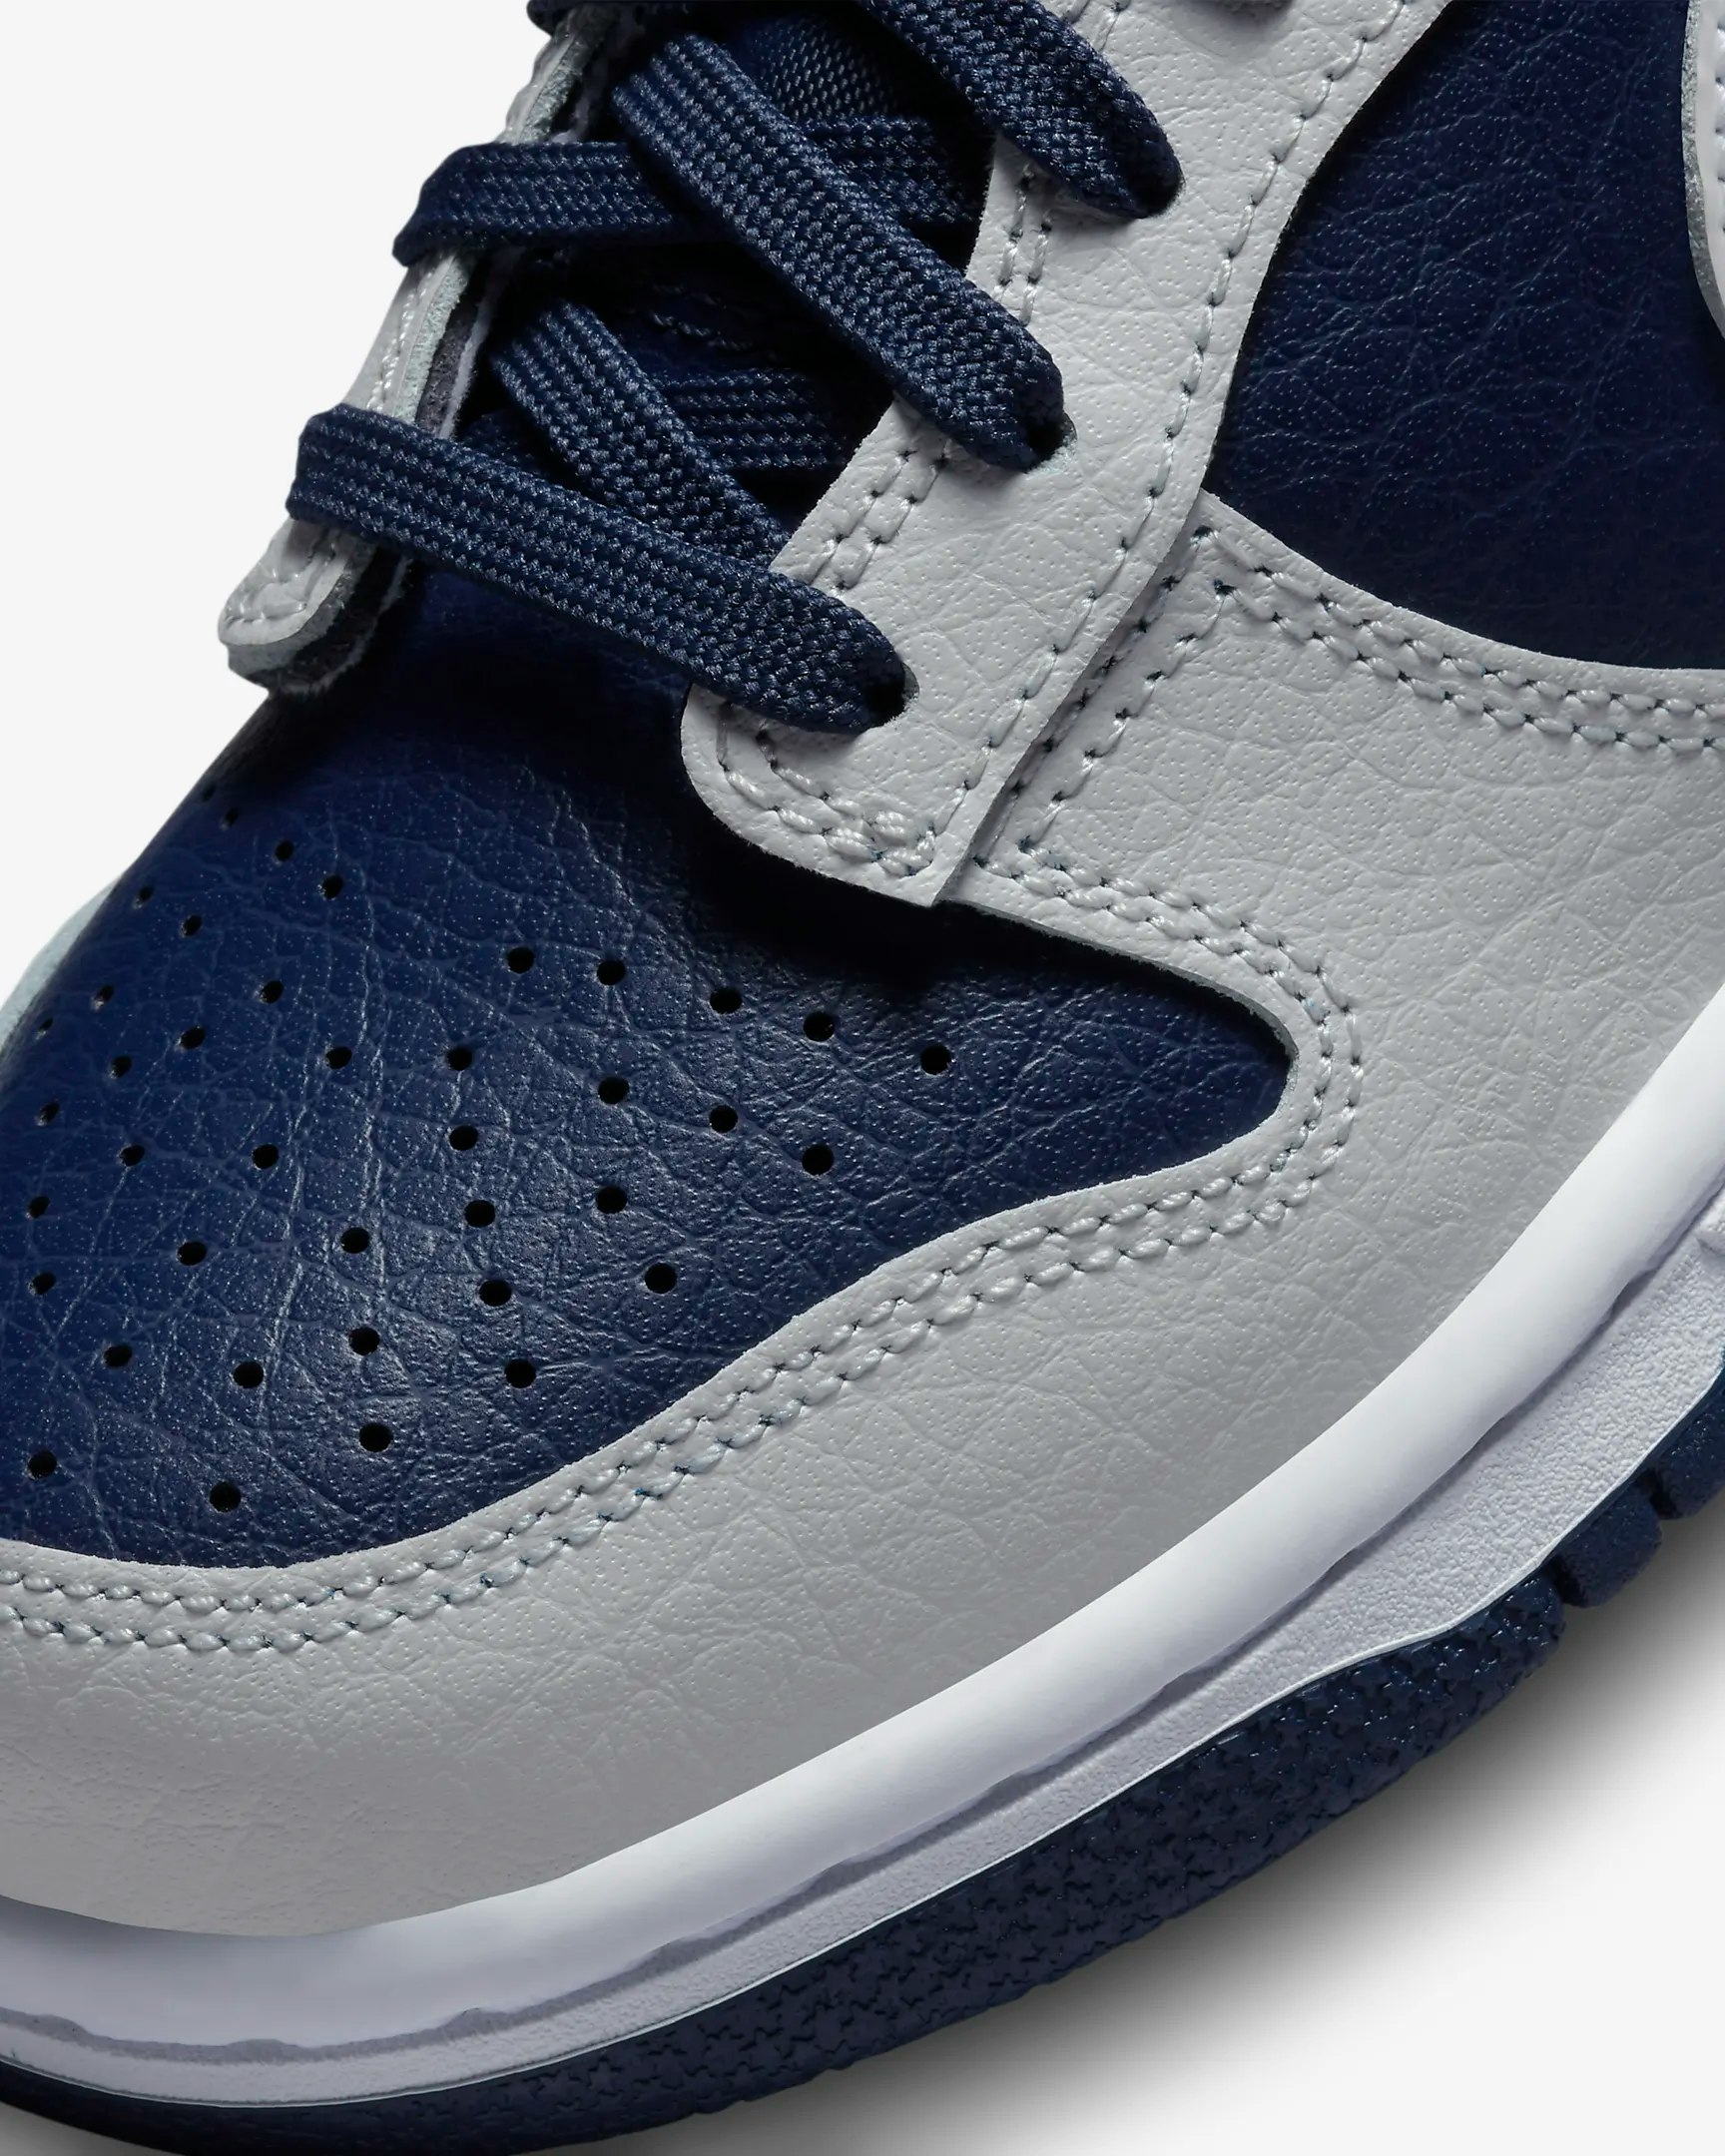 Nike Dunk Low GS "Midnight Navy"